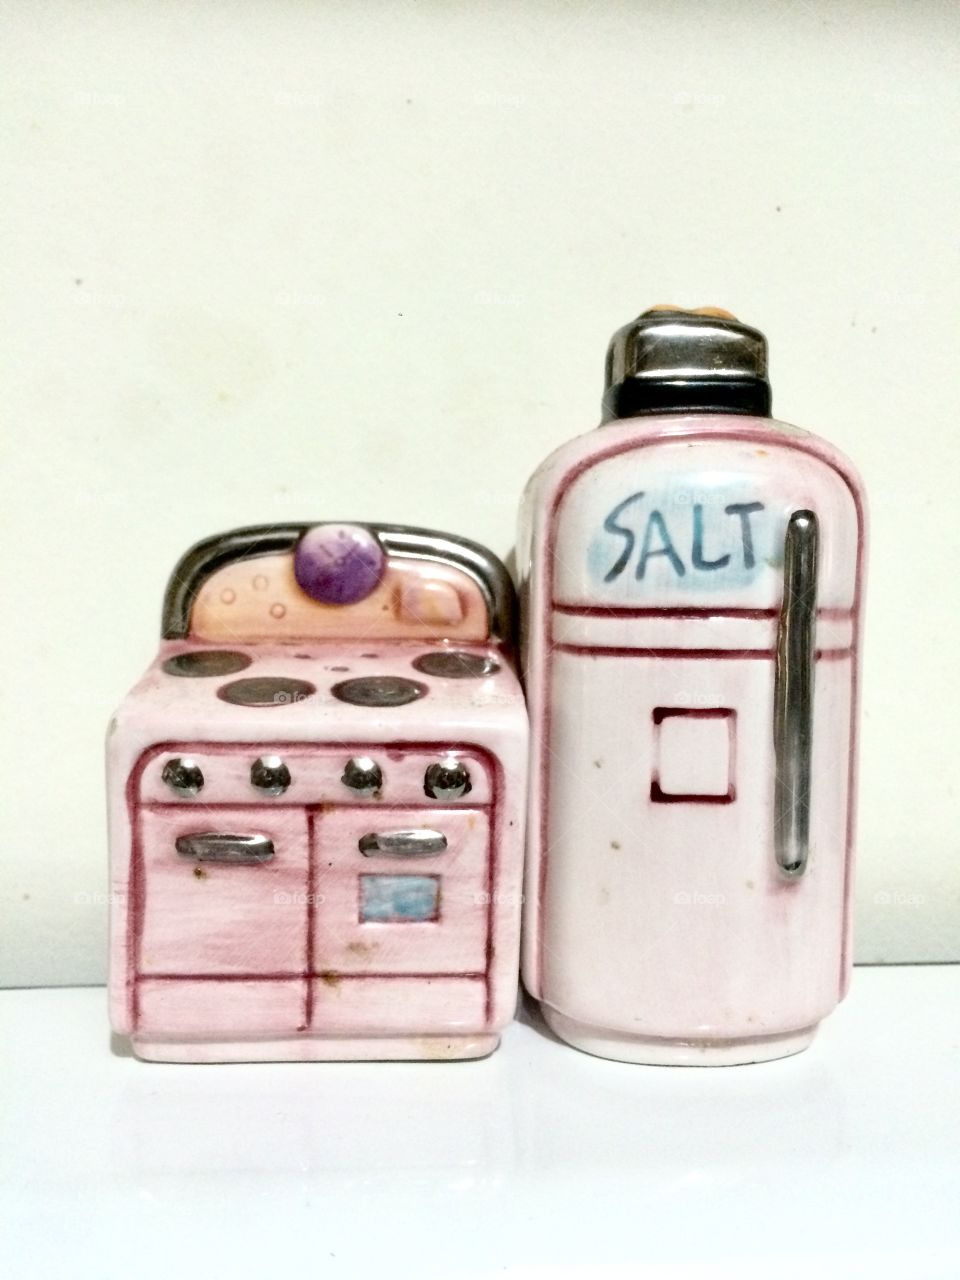 Sometimes salt can be disguised. Know what you put in your body. What’s in your fridge? 